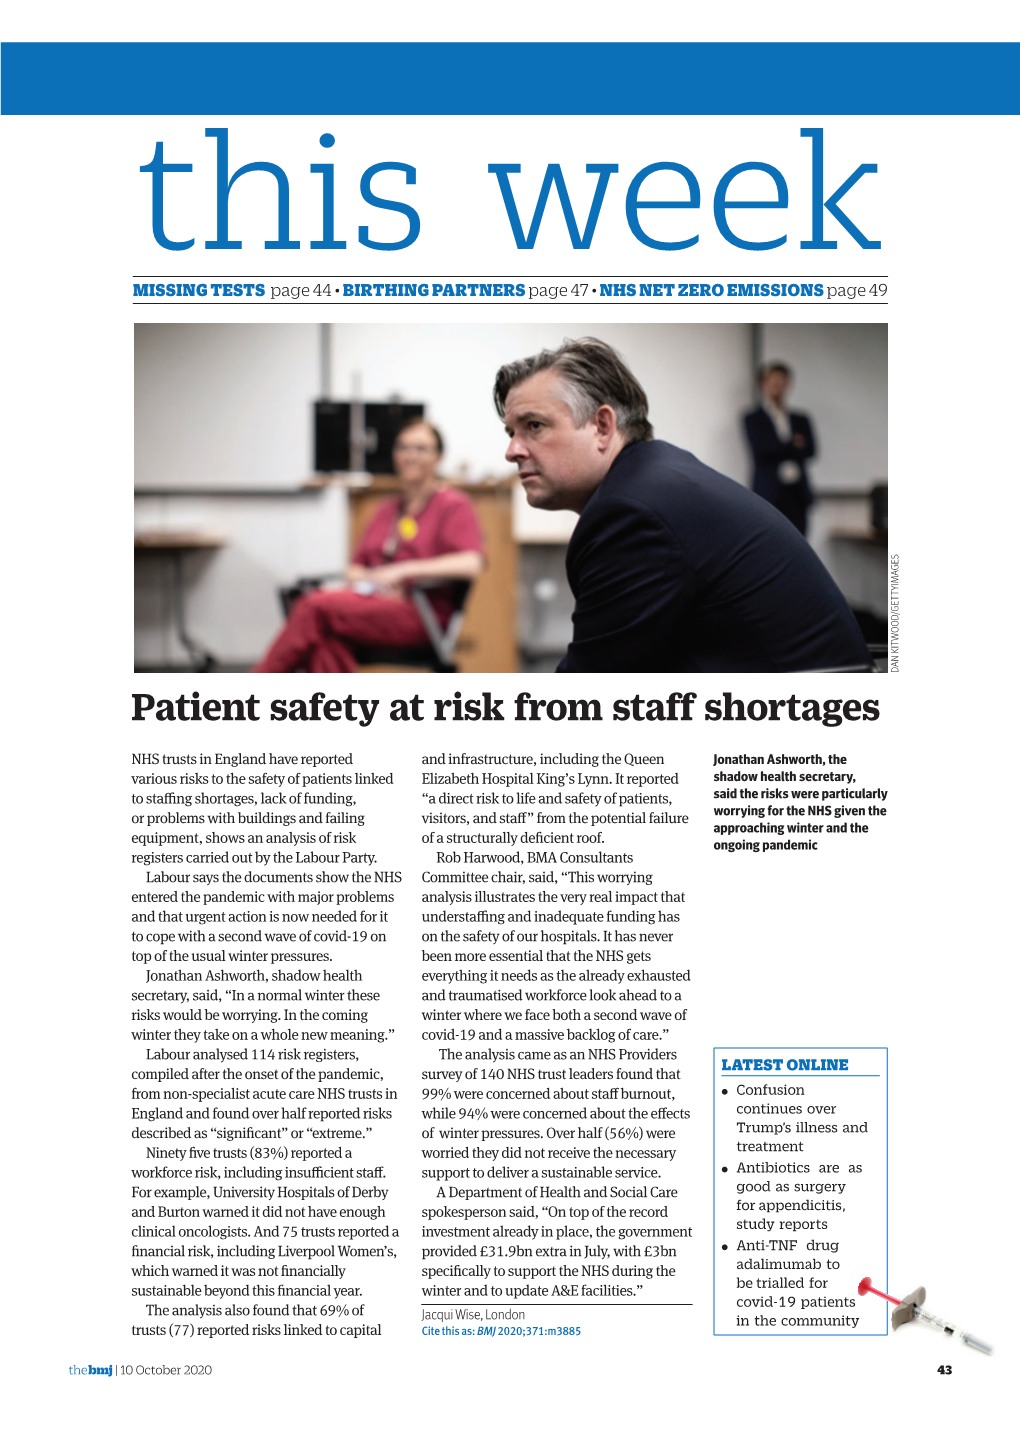 Patient Safety at Risk from Staff Shortages